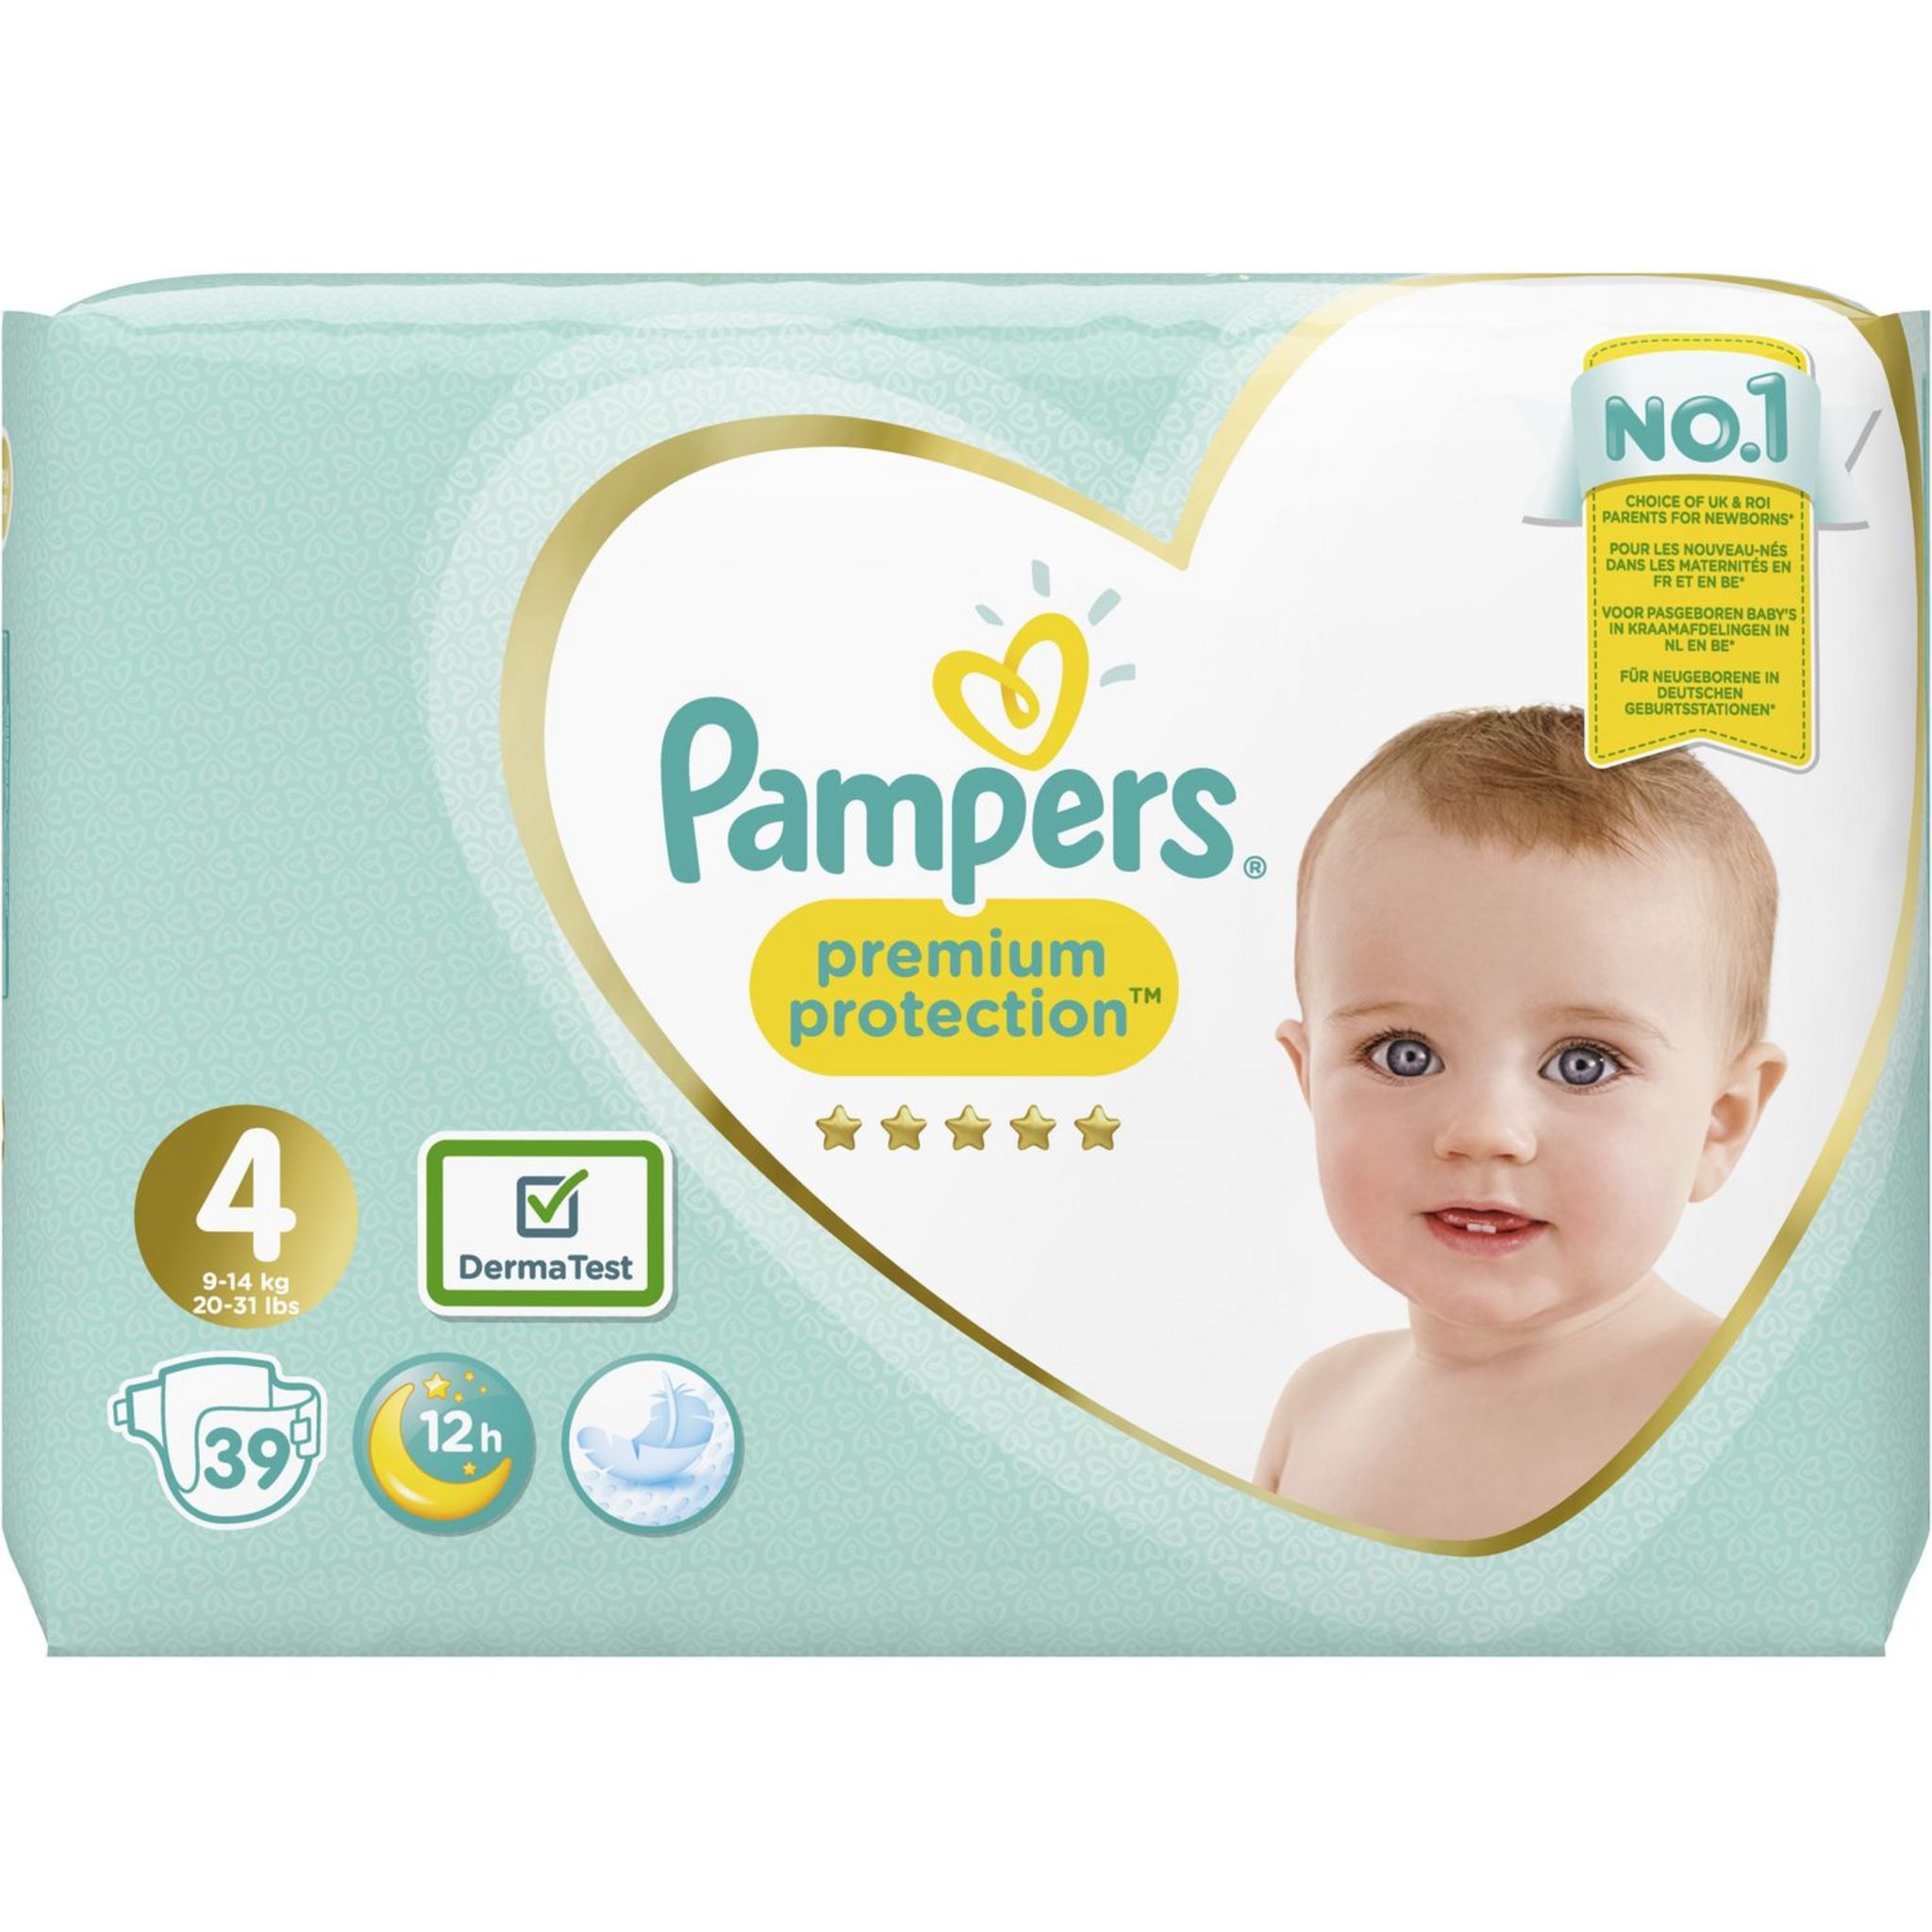 PAMPERS Premium protection géant couches taille 4 (9-14kg) 39 couches pas  cher 